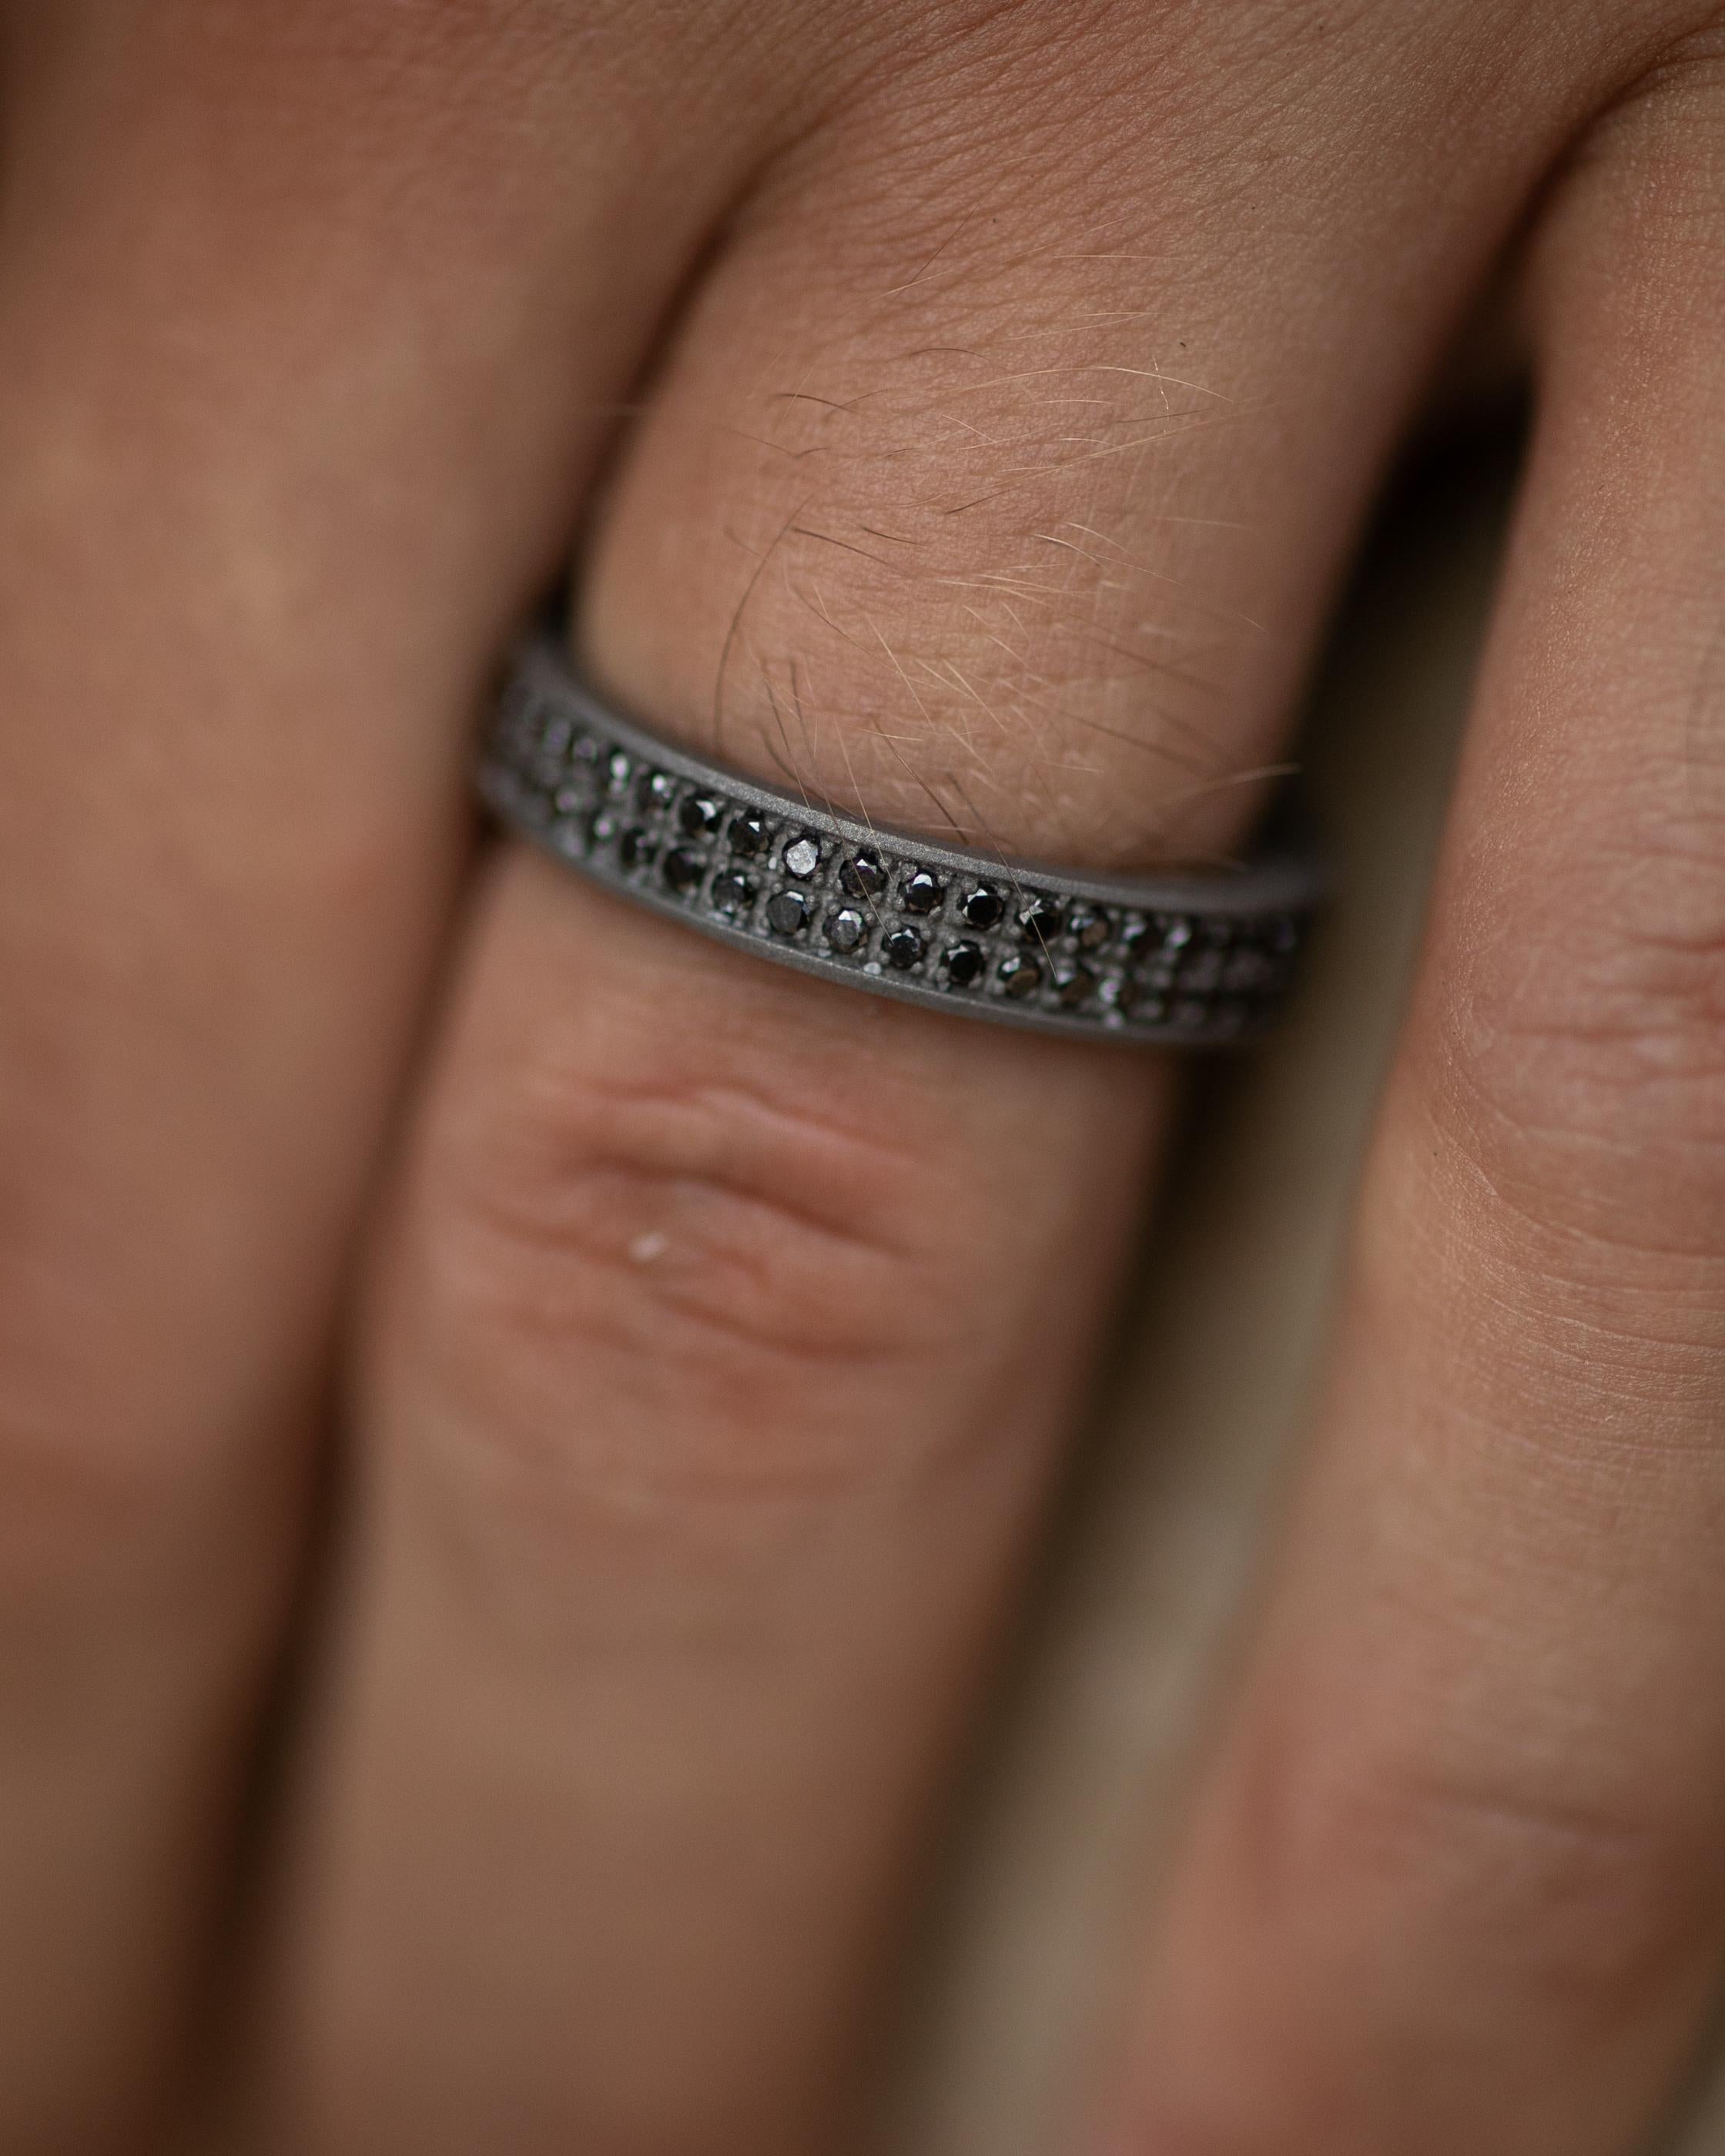 Titanium band ring is from our Men's Collection. This masculine modern ring is made of 43 natural black round diamonds in total of 0.43 Carat placed along the band with stylish 18K rose gold detail. The band is 0.3cm wide. Perfect for manly